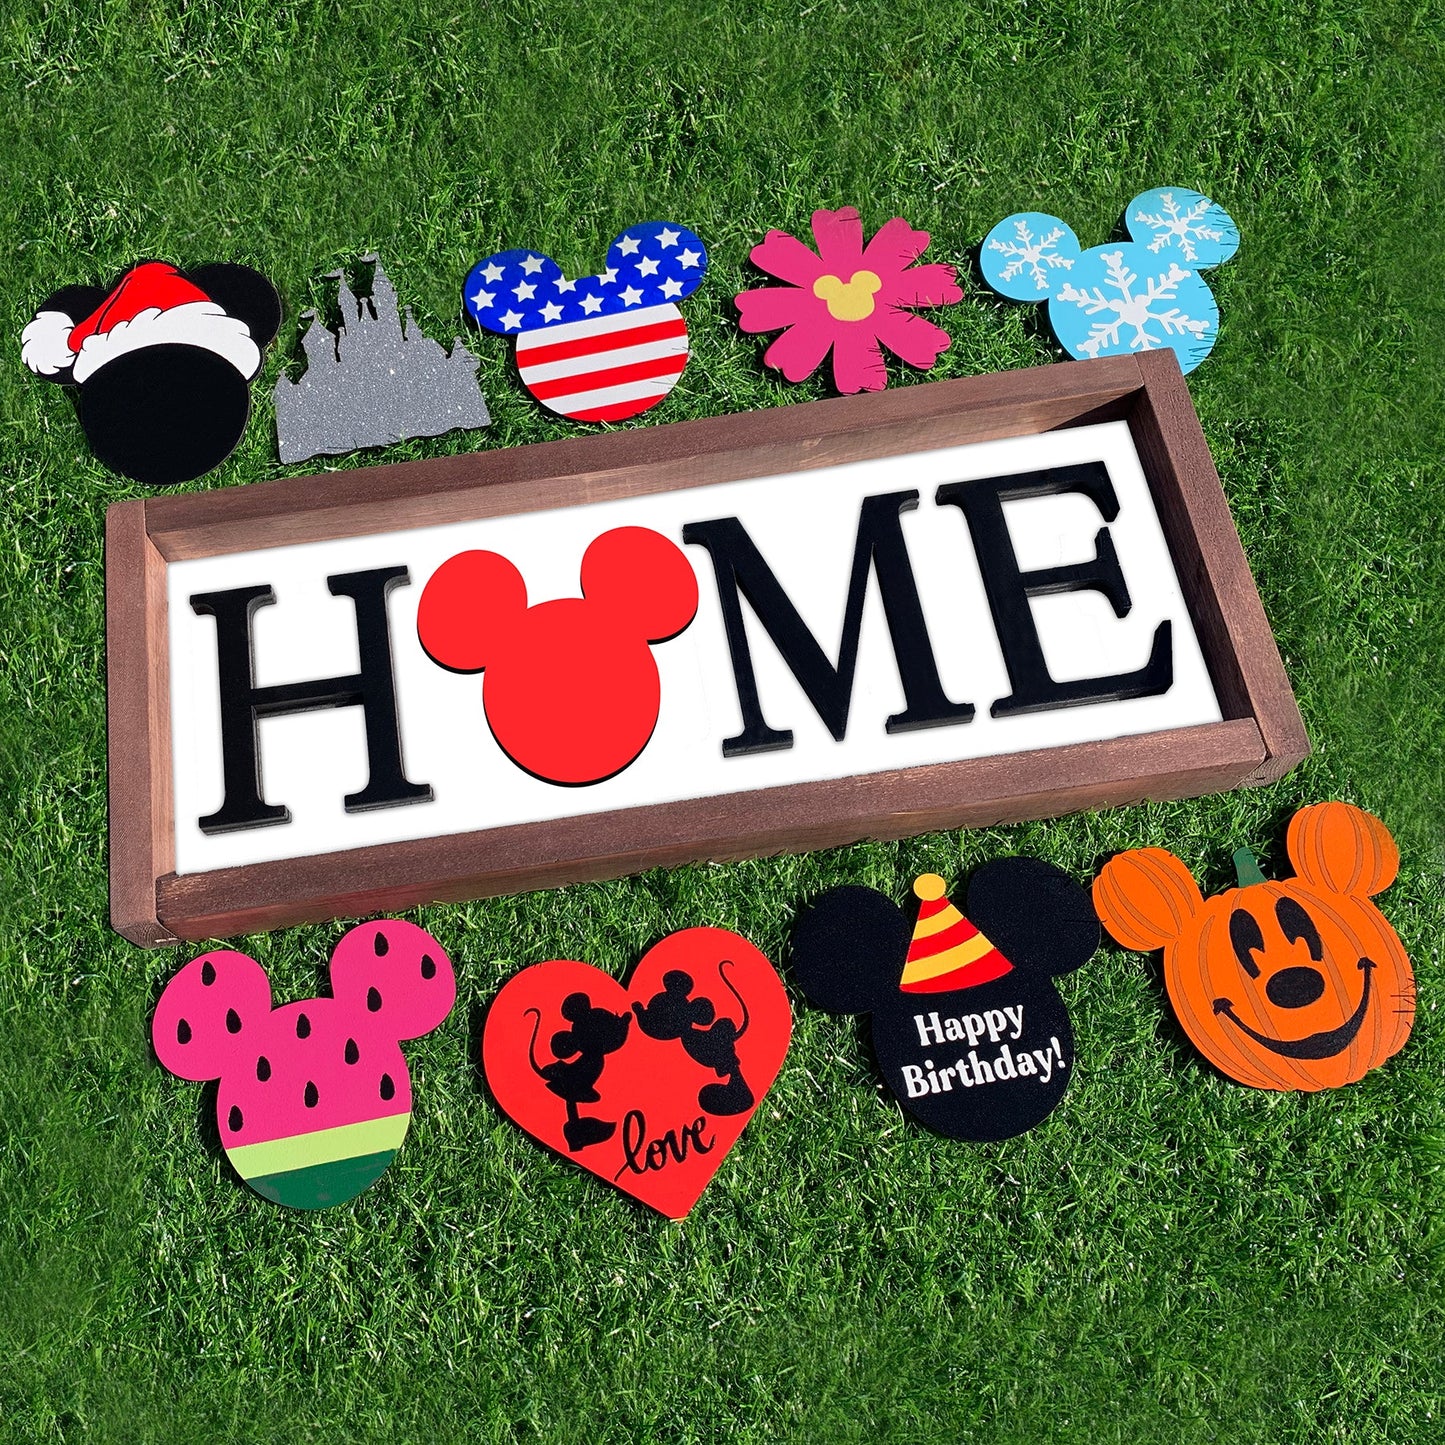 Home Interchangeable Sign Kit Includes EXCLUSIVE 10 Icon Magnetic Pieces - FREE SHIPPING